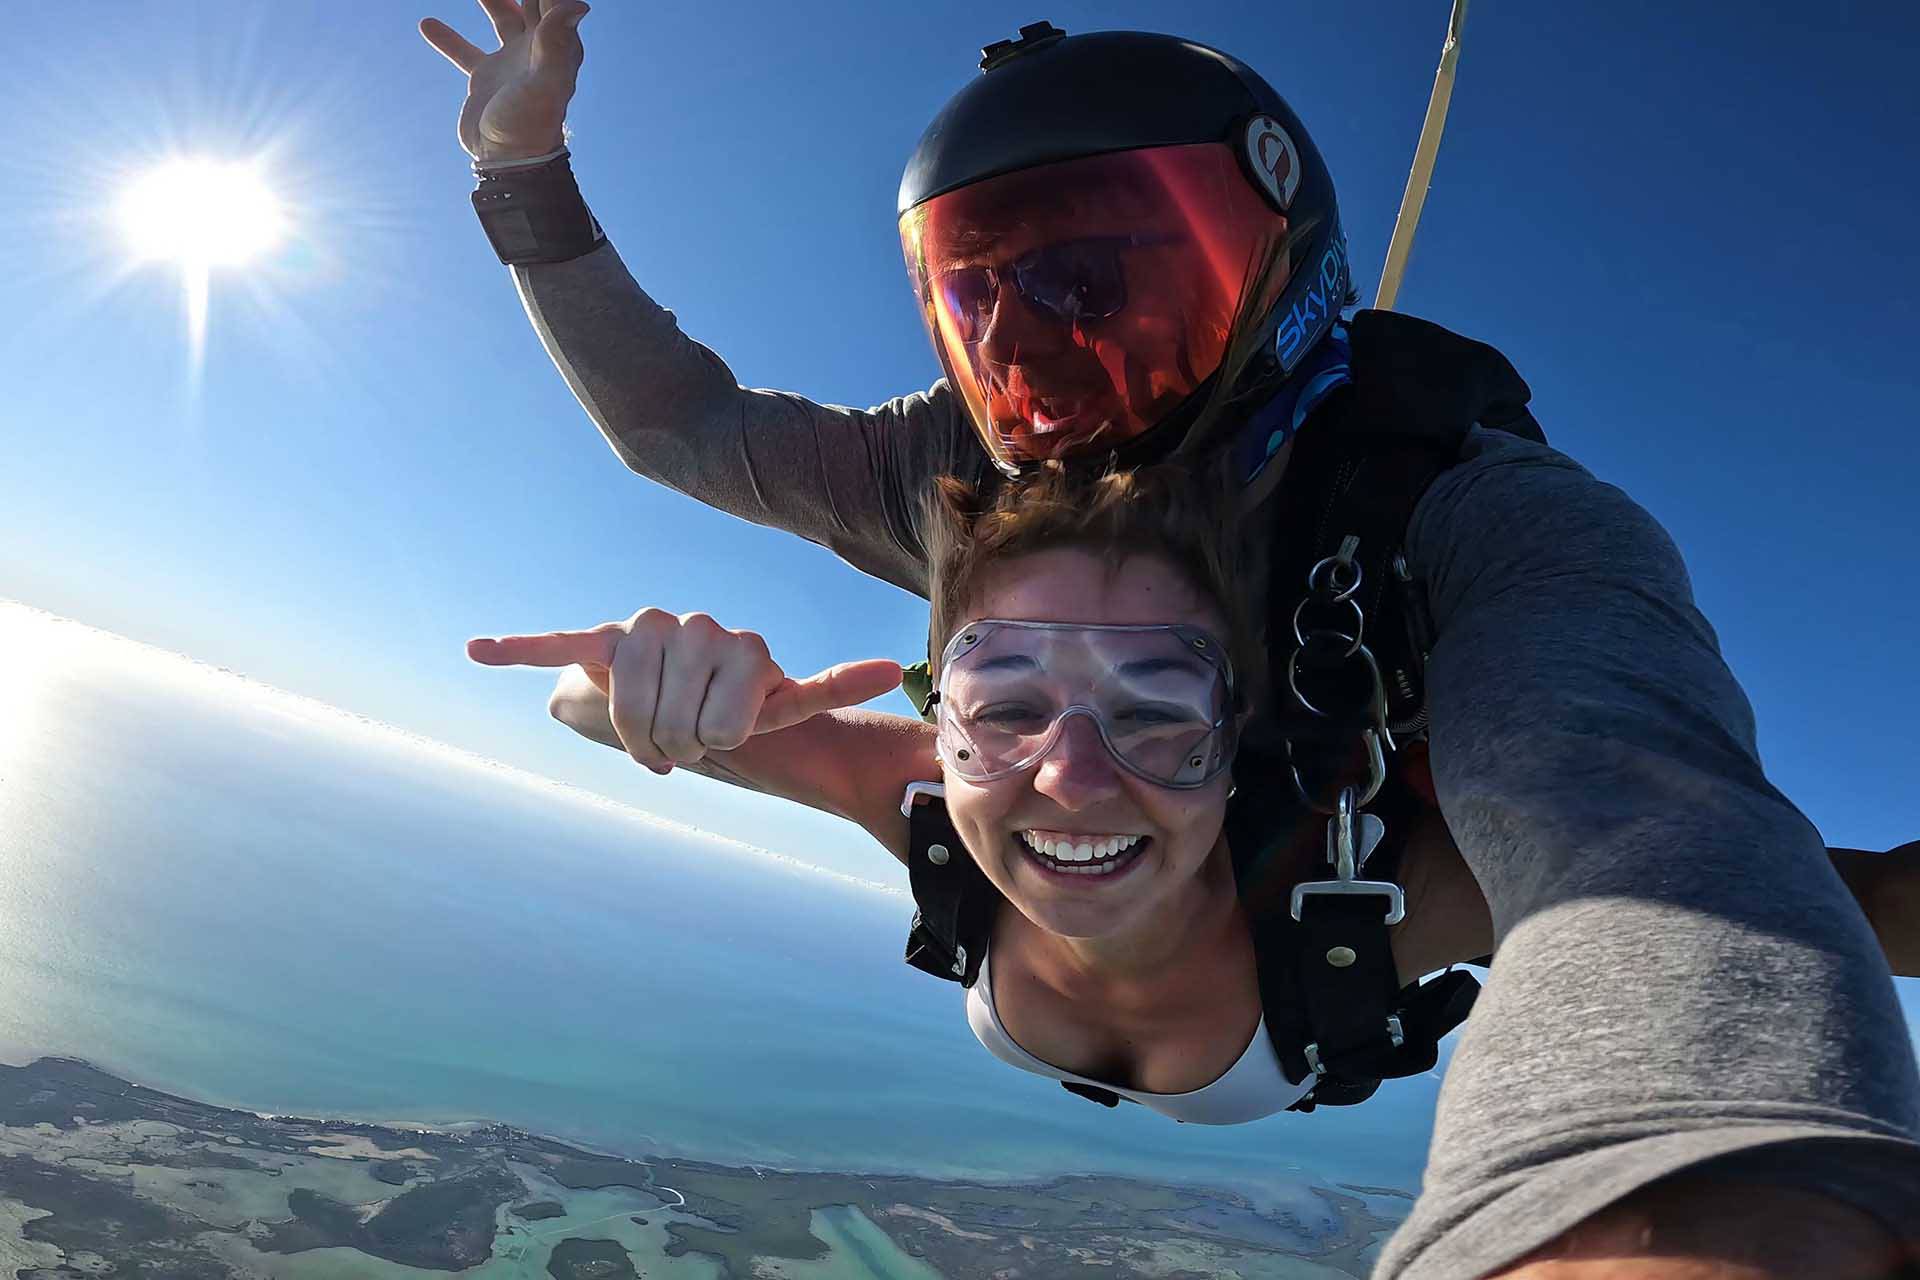 Woman smiles during her jump at Skydive Key West